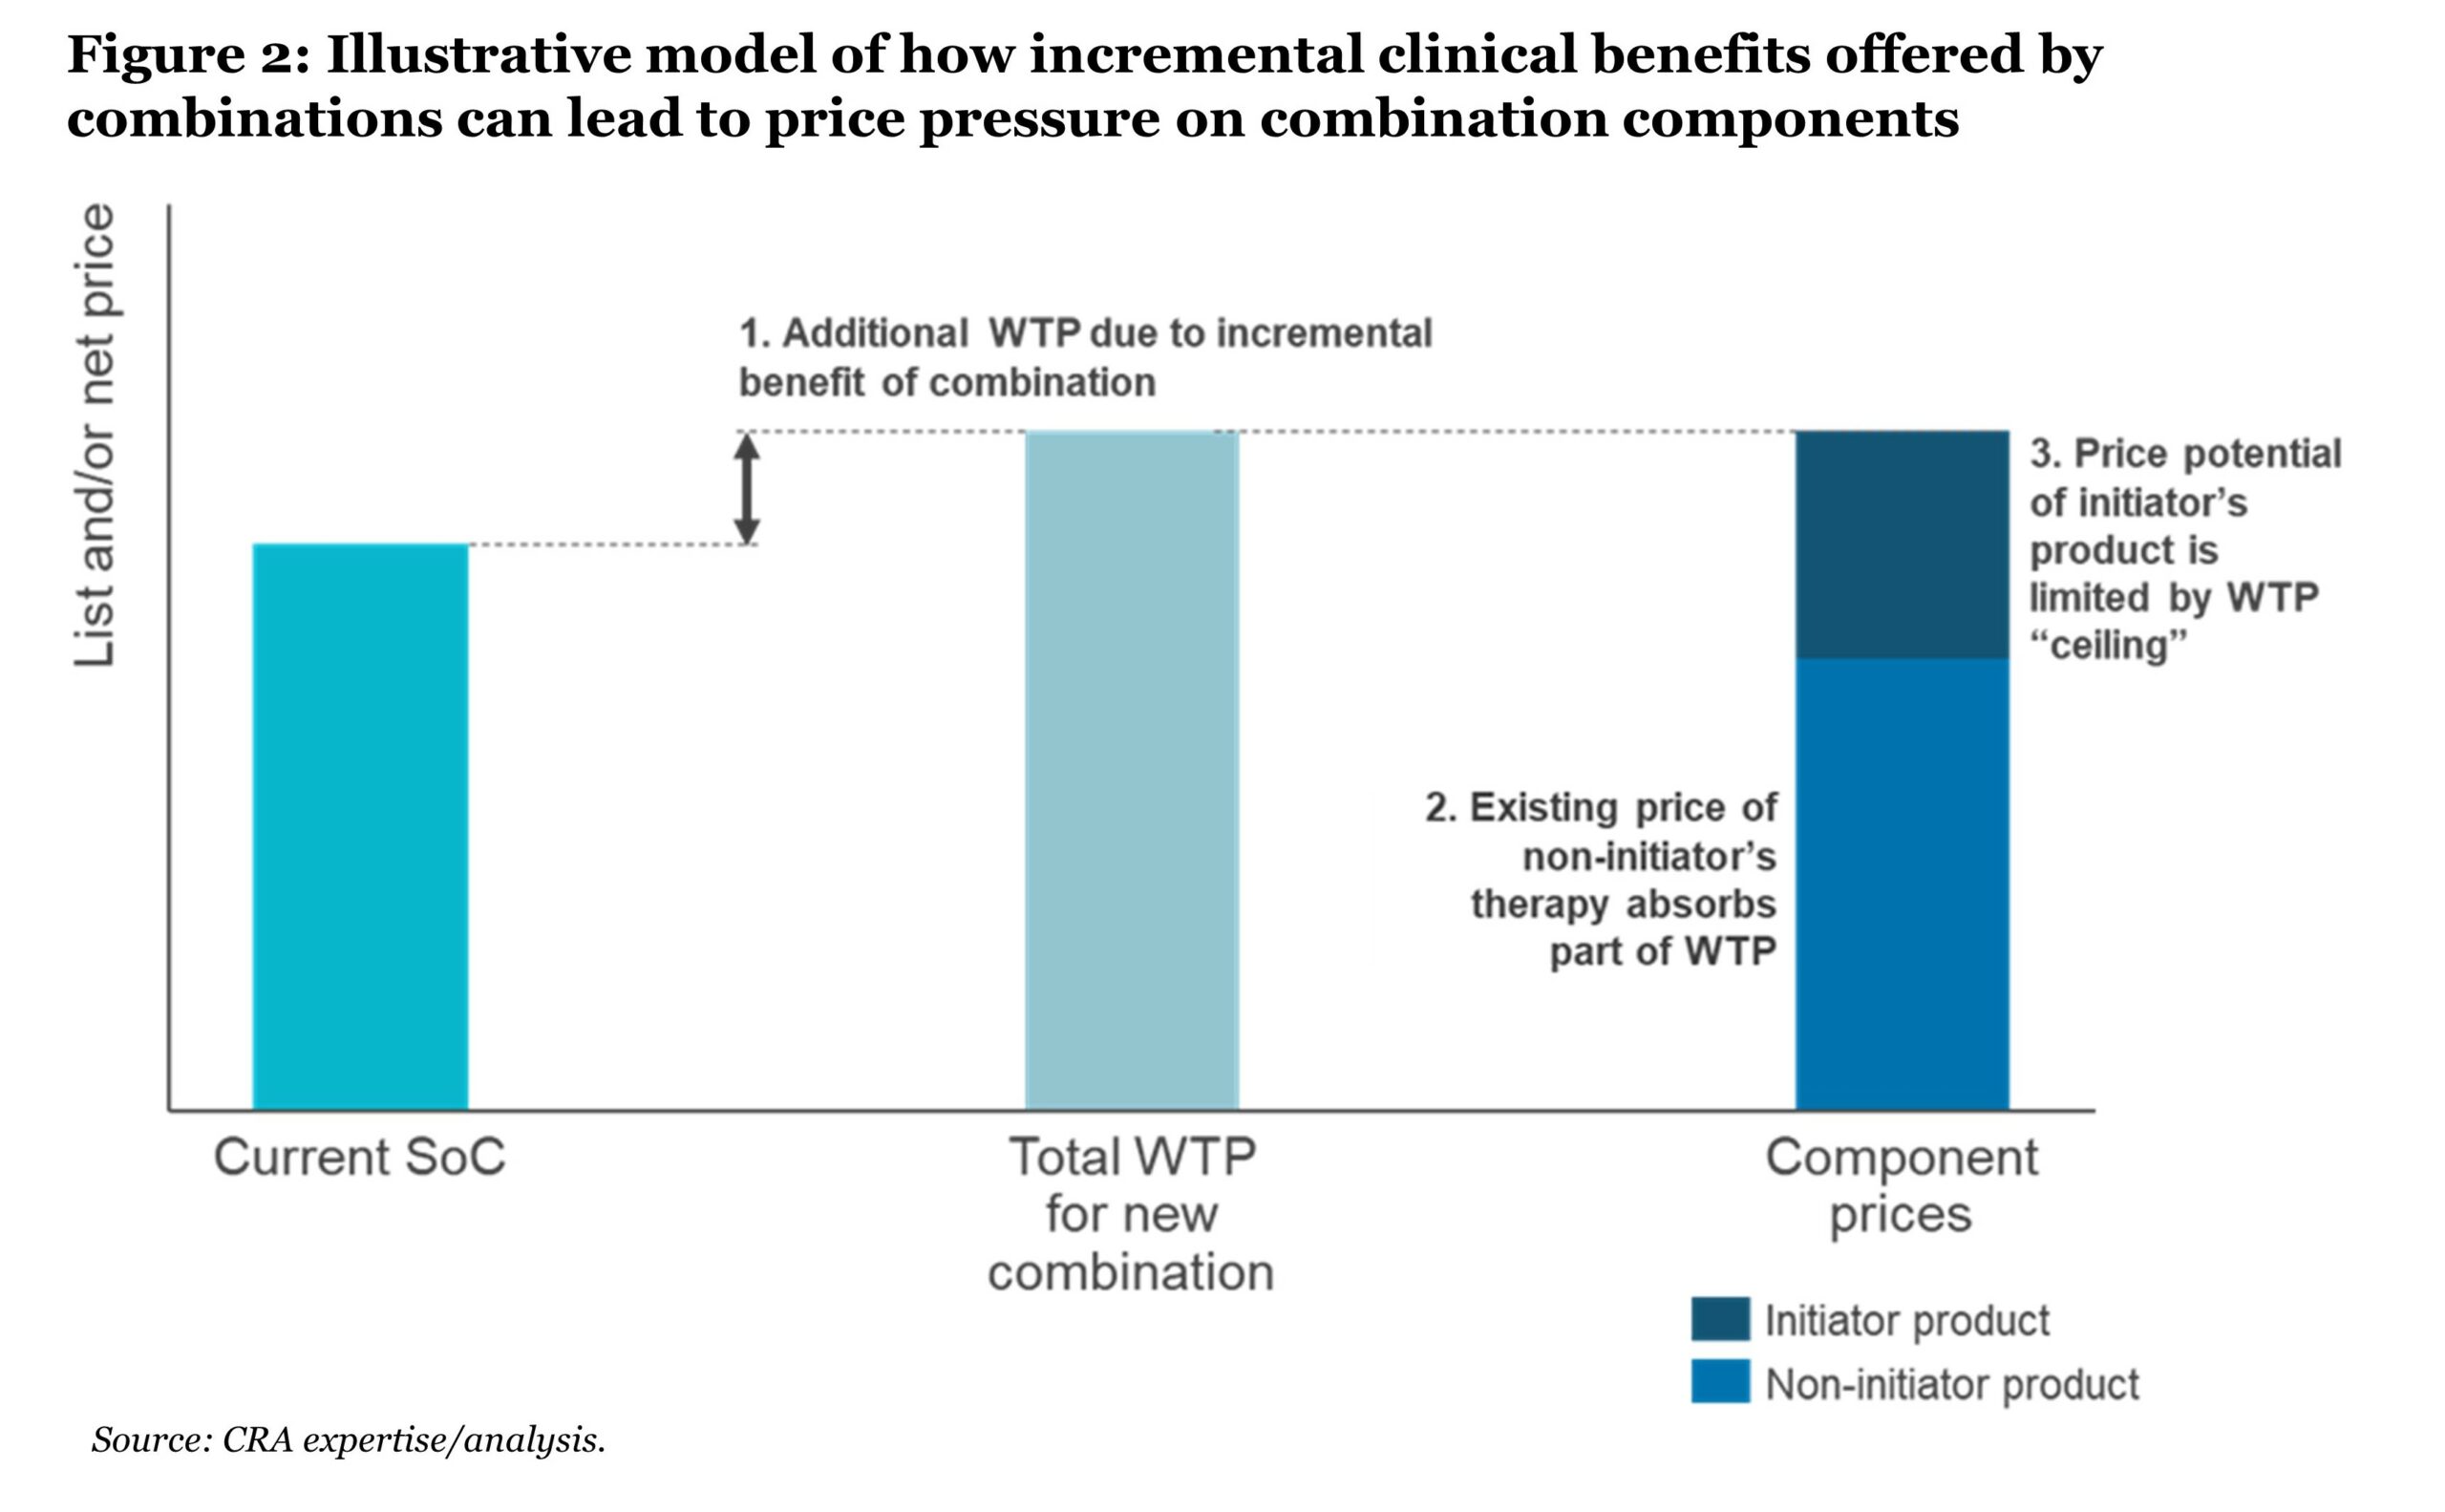 Figure 2 shows the illustrative model of how incremental clinical benefits offered by combinations can lead to price pressure on combination components. The bar graph shows Current SoC having a lower list and/or net price then the Total WTP for new combination, with the difference being the additional WTP due to incremental benefit of combination. Meanwhile, the component prices of a combination therapy are mostly made up of the existing price of non-initiator's therapy, which absorbs part of the WTP. And then the price potential of the initiator's product is limited by the WTP ceiling. 